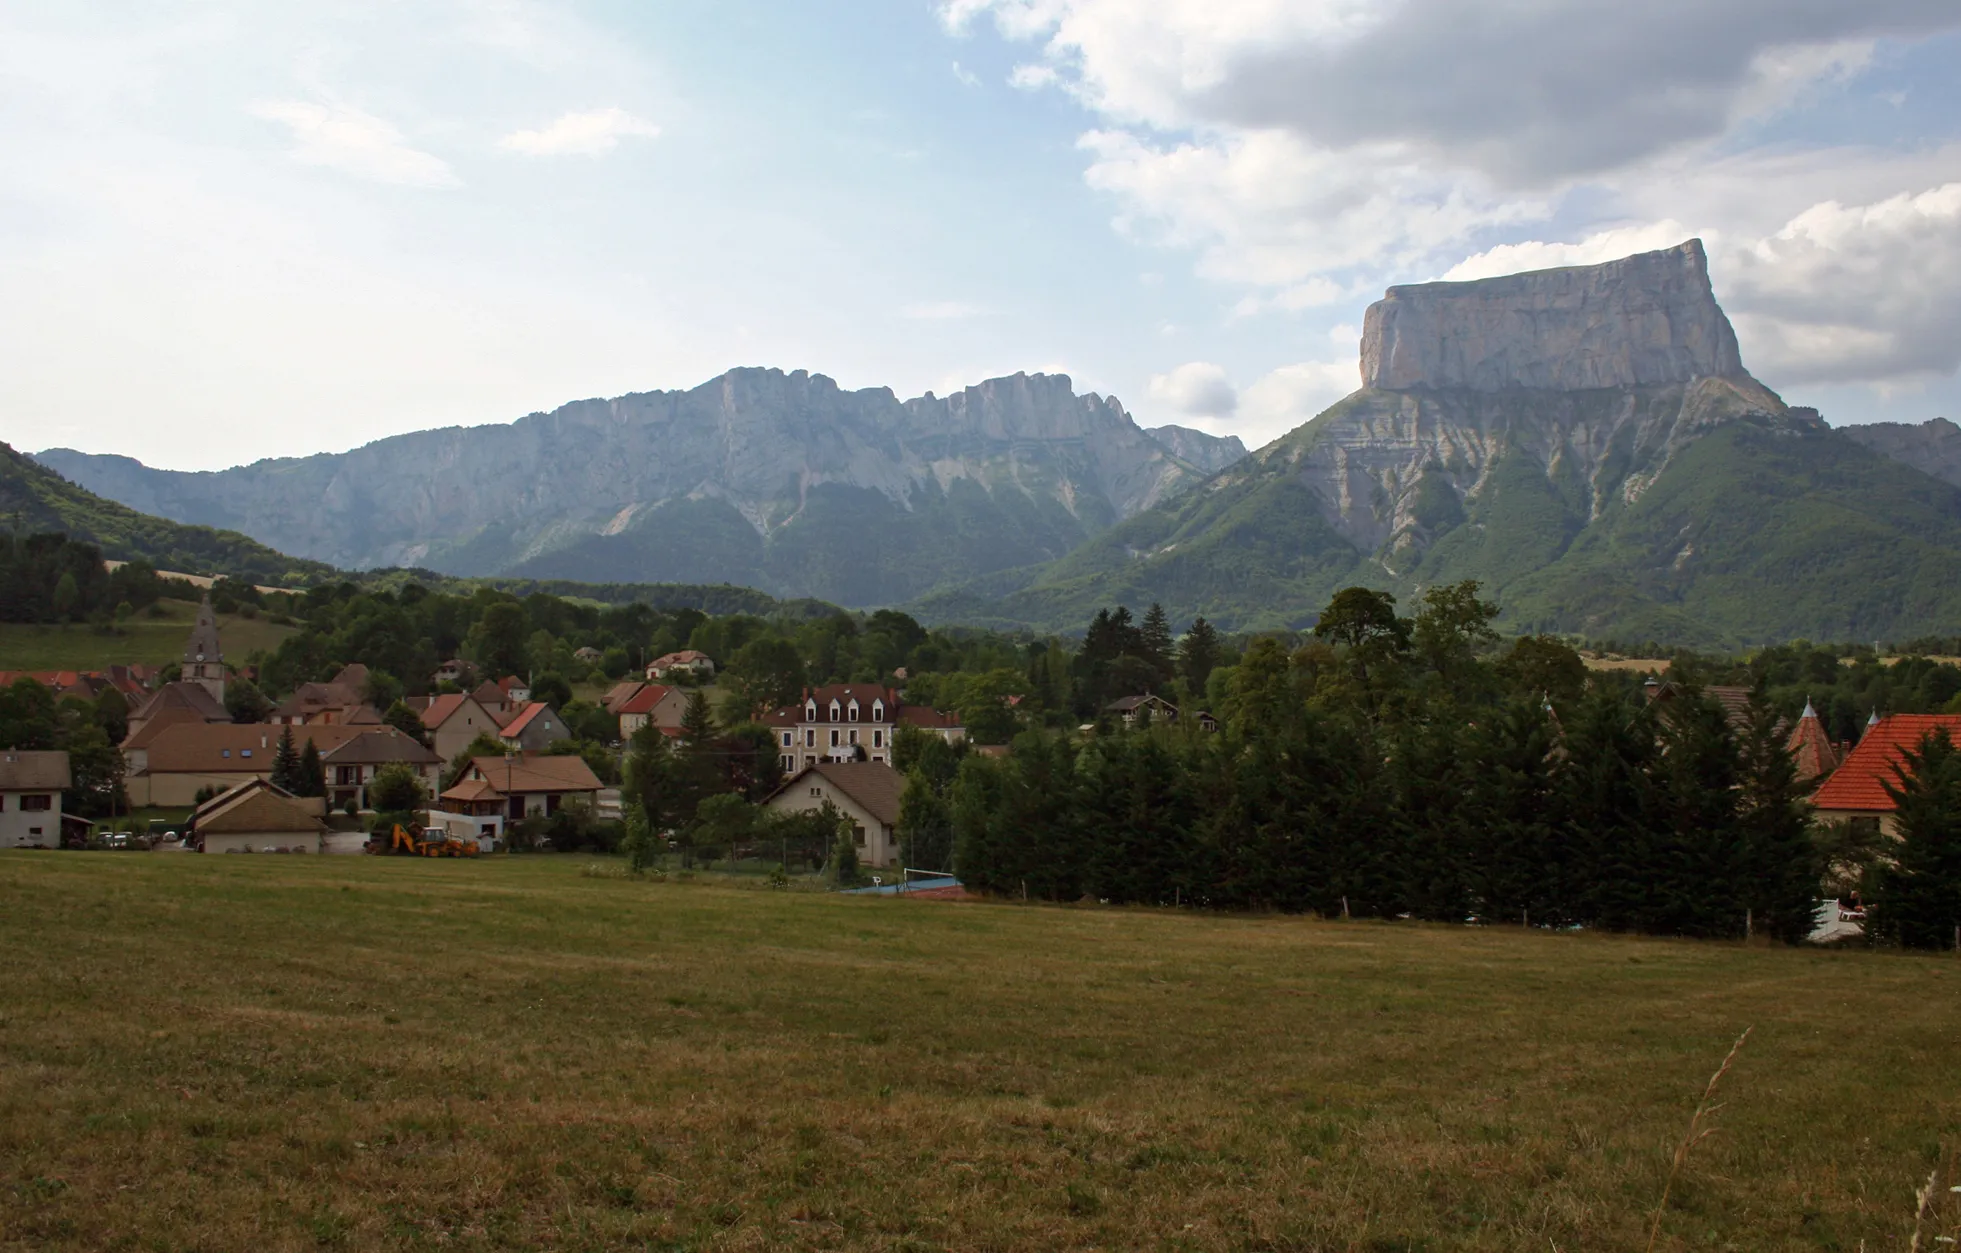 Photo showing: Mont Aiguille (Needle Montain) as seen from the Trieves. Mont aiguille is the mesa like mountain on the right. The cliffs on the left, called Rochers du parquet are the eastern limit of the Vercors plateau. The village of Chichilianne is visible in the foothills.